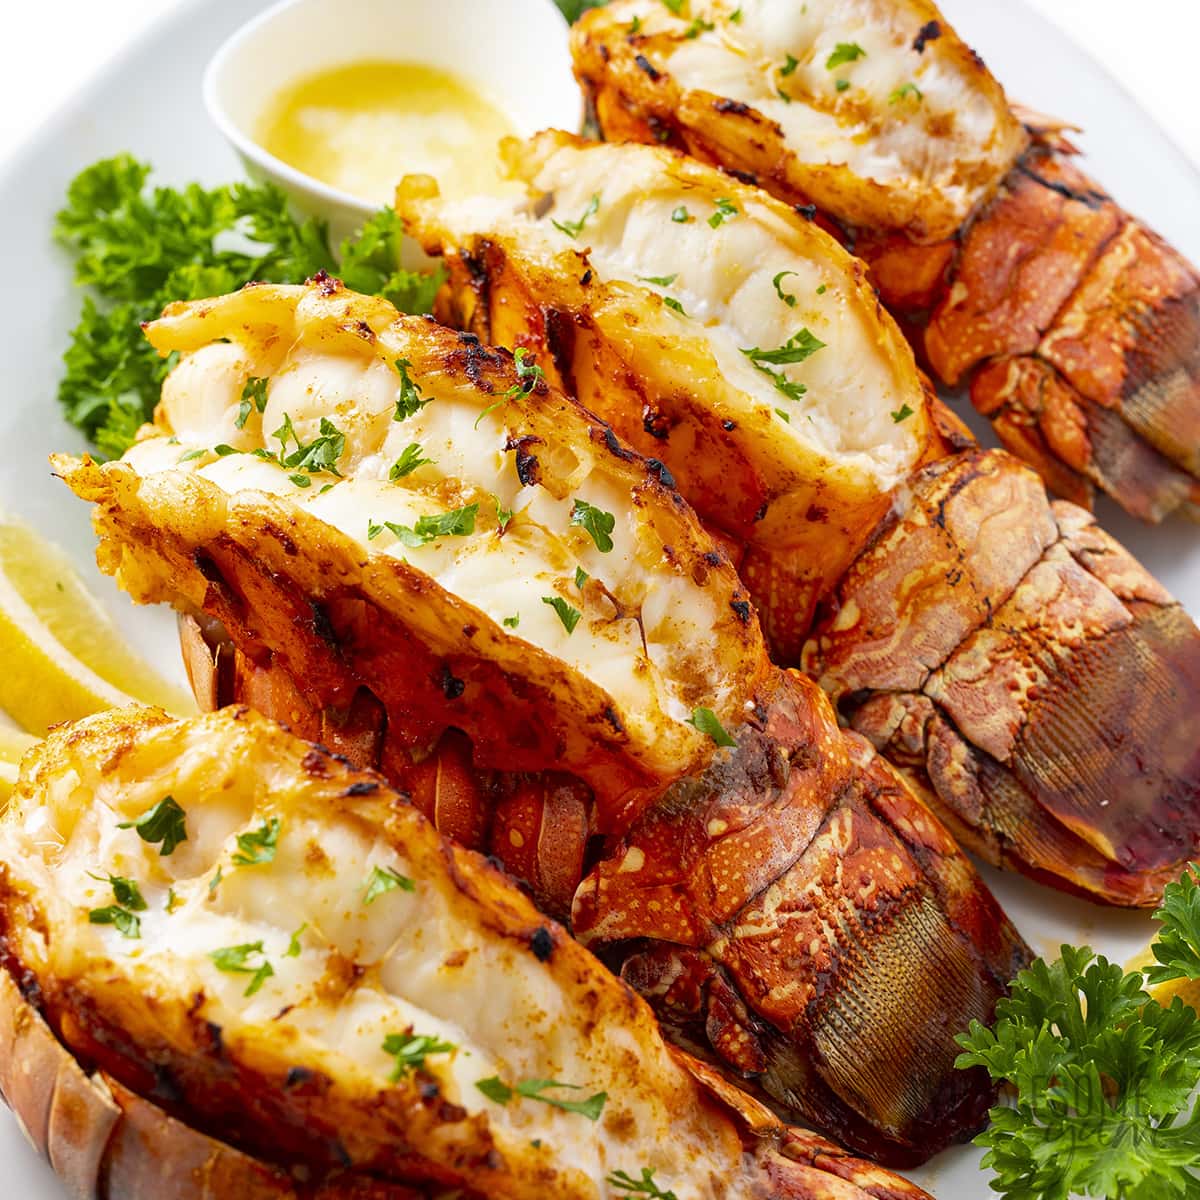 Lobster tails with lemon wedges and parsley.